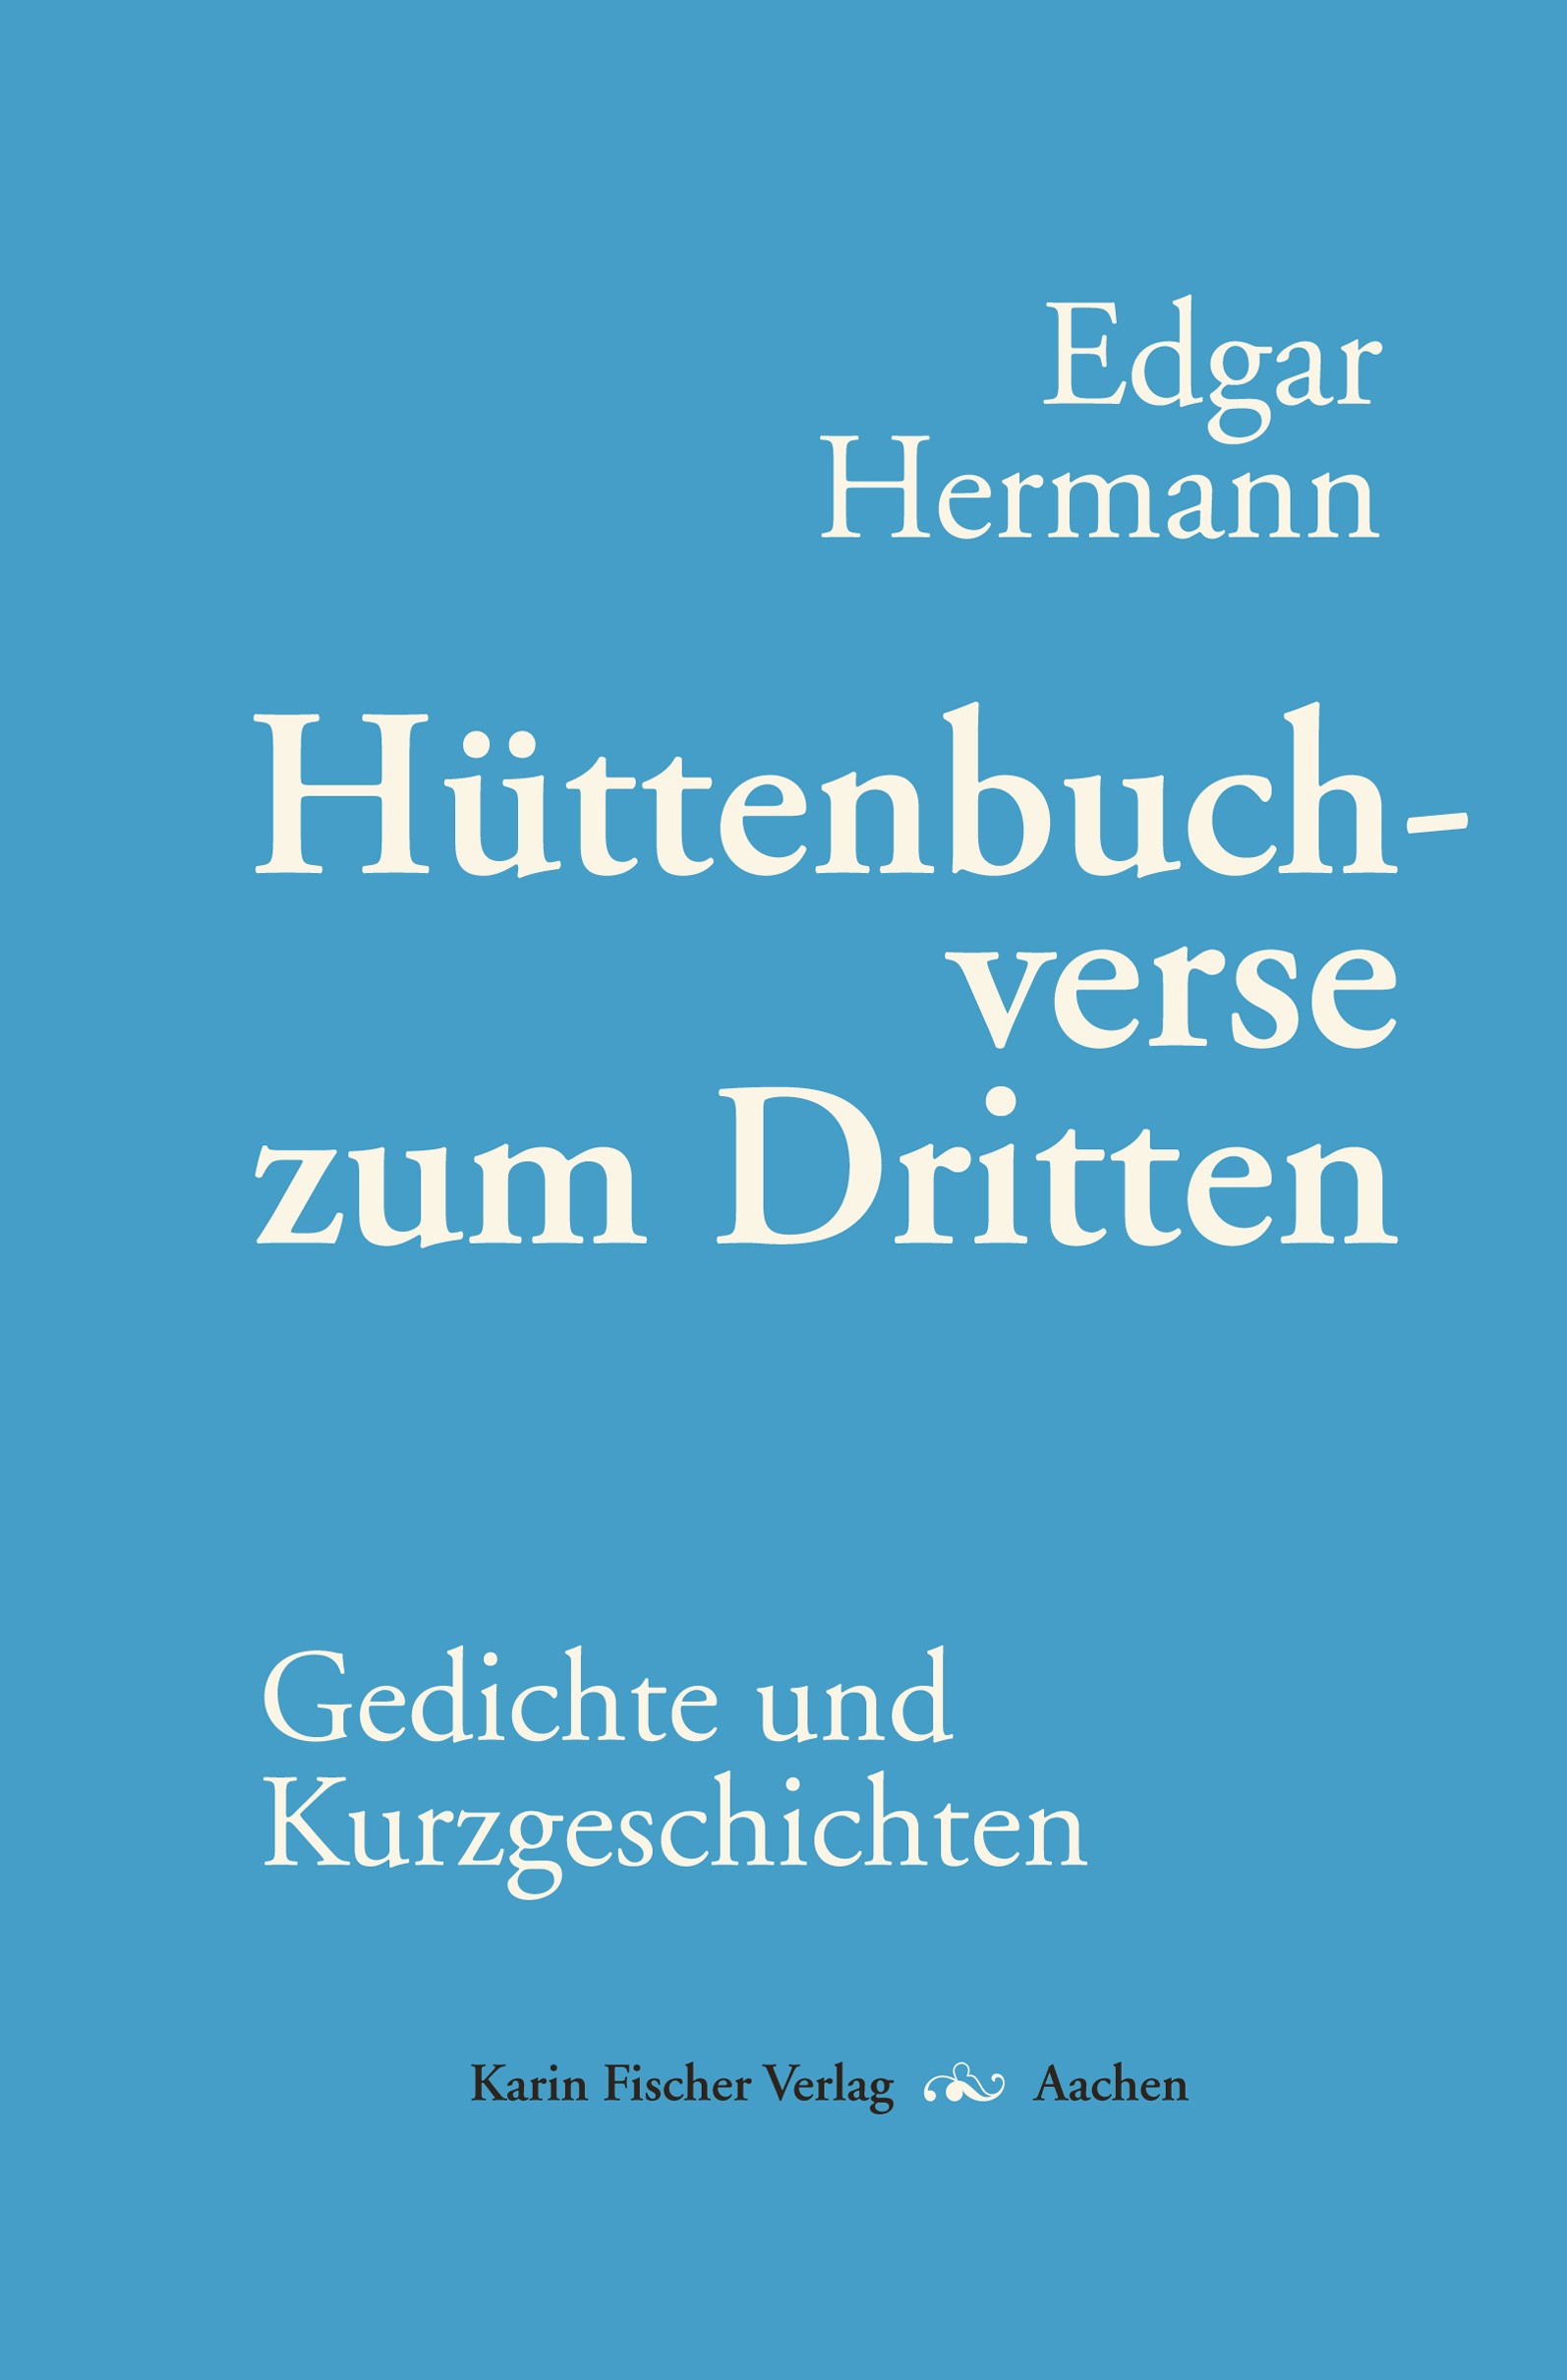 image-9228368-Cover_Buch3.jpg